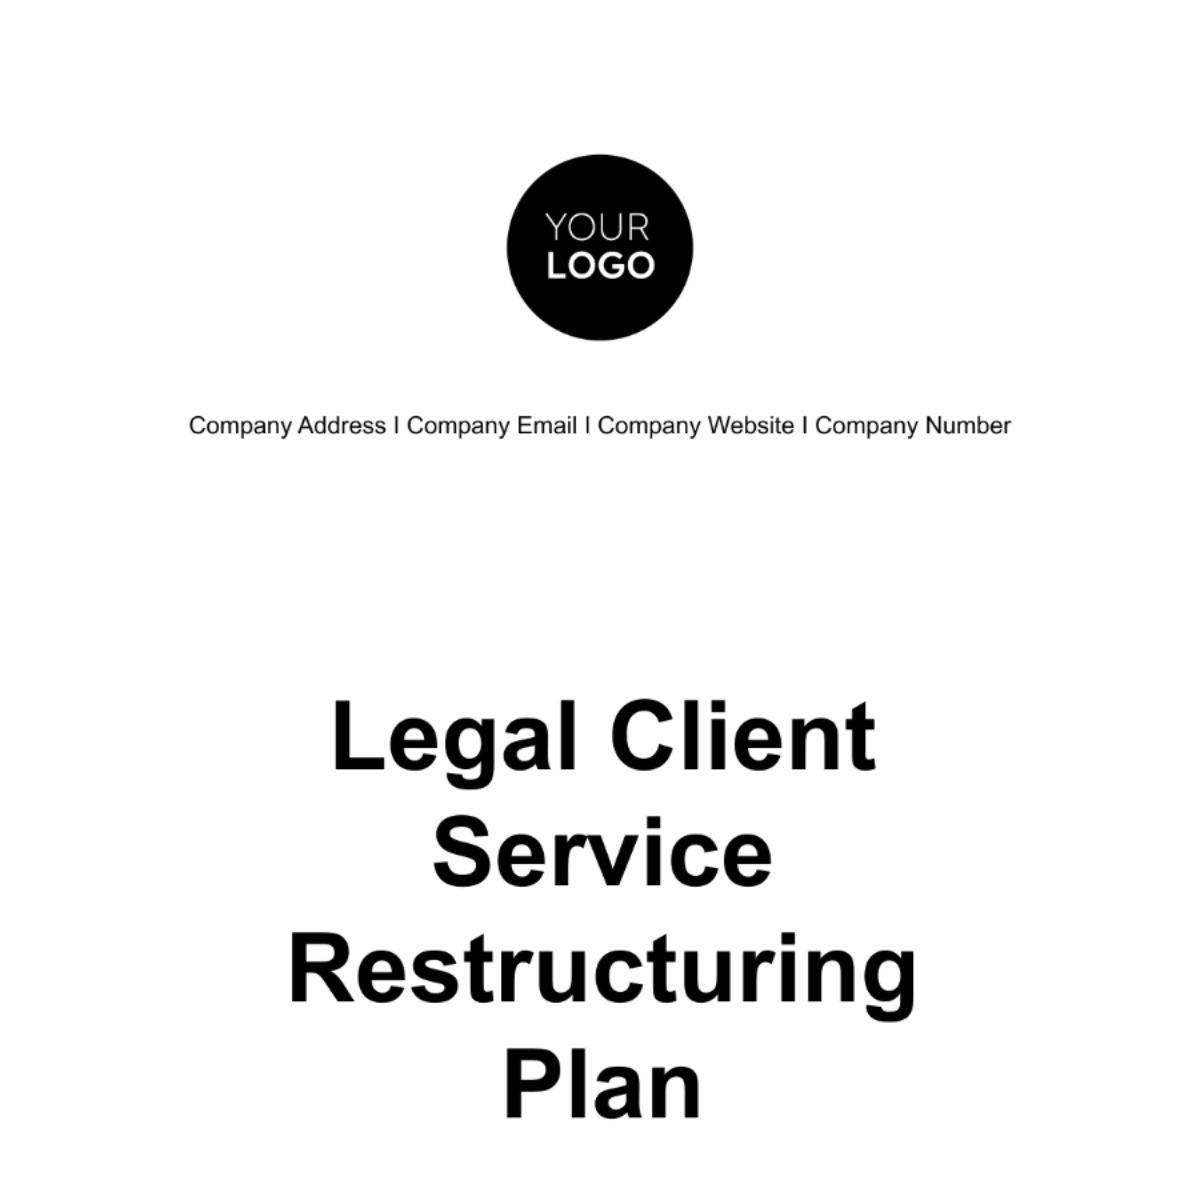 Free Legal Client Service Restructuring Plan Template